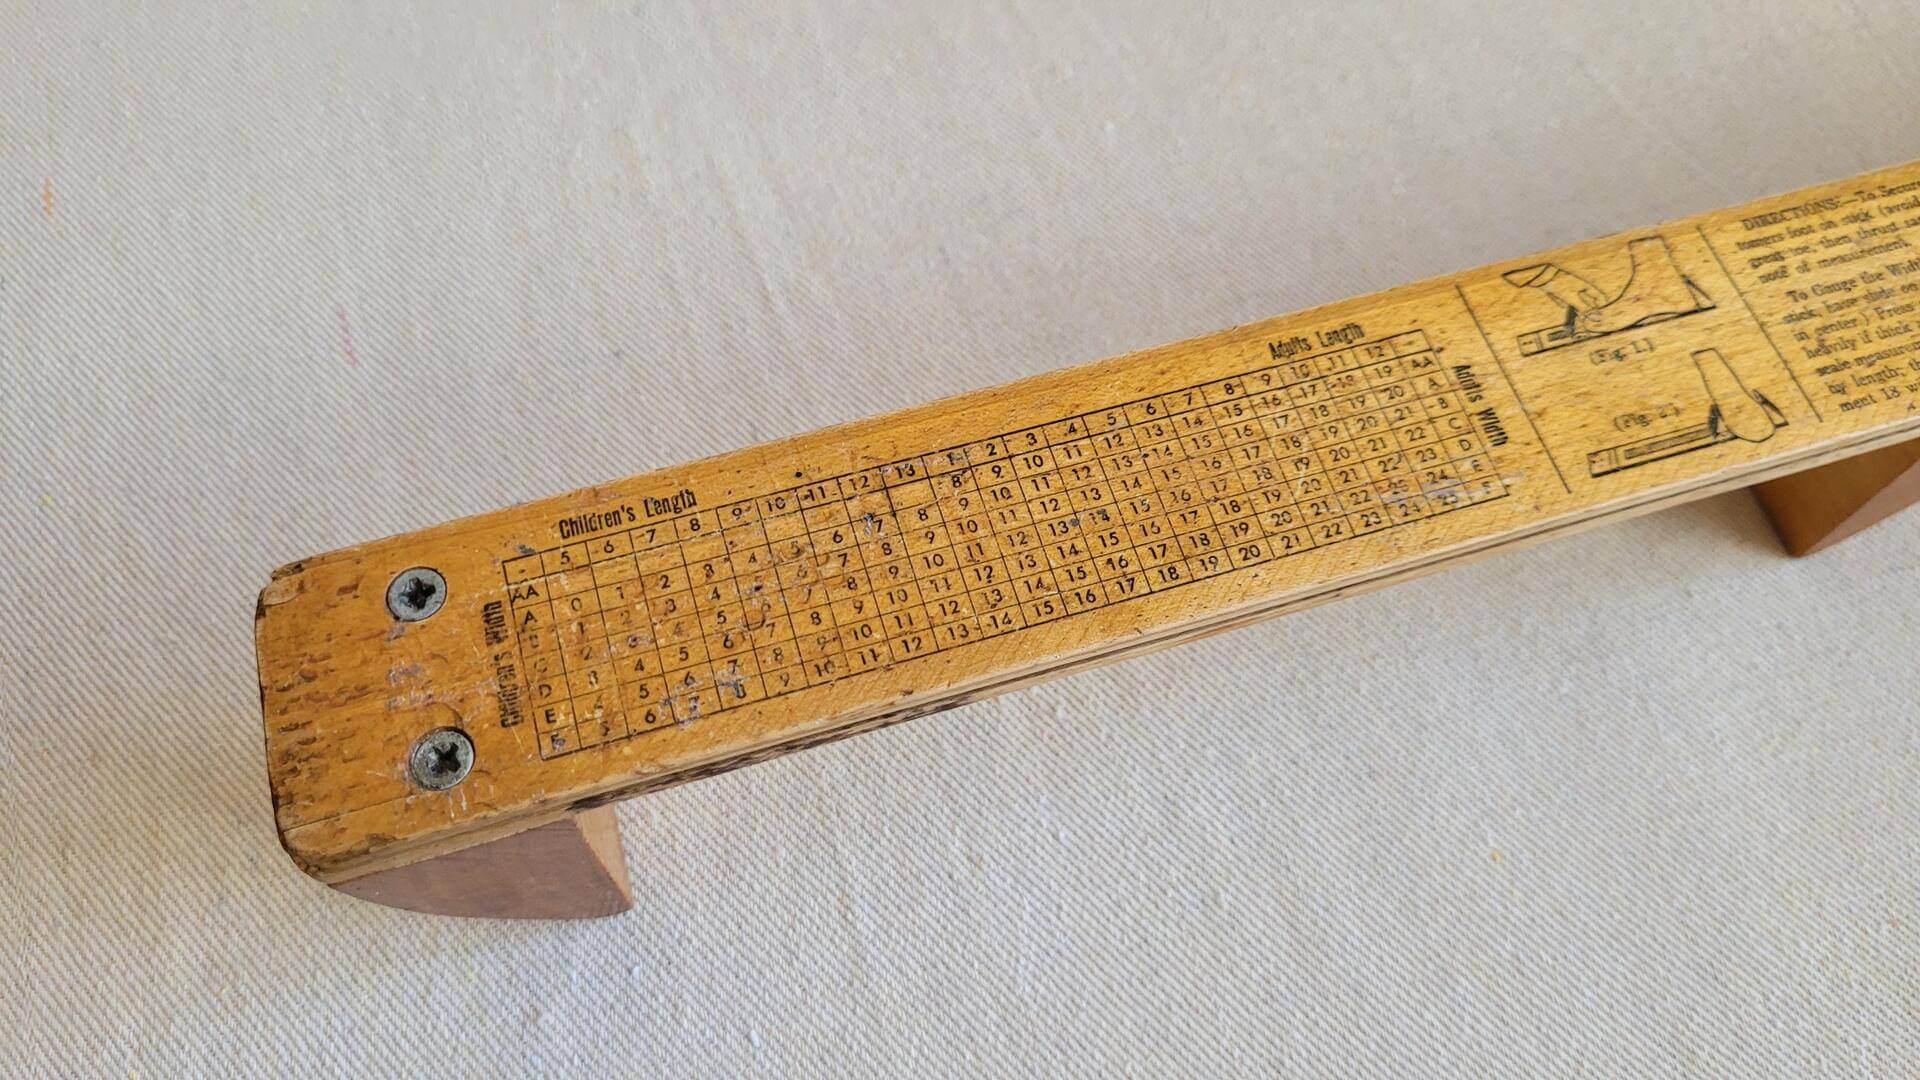 Ritz wooden foot size measuring tool manufactured by American Automatic Devices Co from Chicago Ill. Vintage MCM made in USA collectible shoe sizer and shoe store fitting tool and accessory.